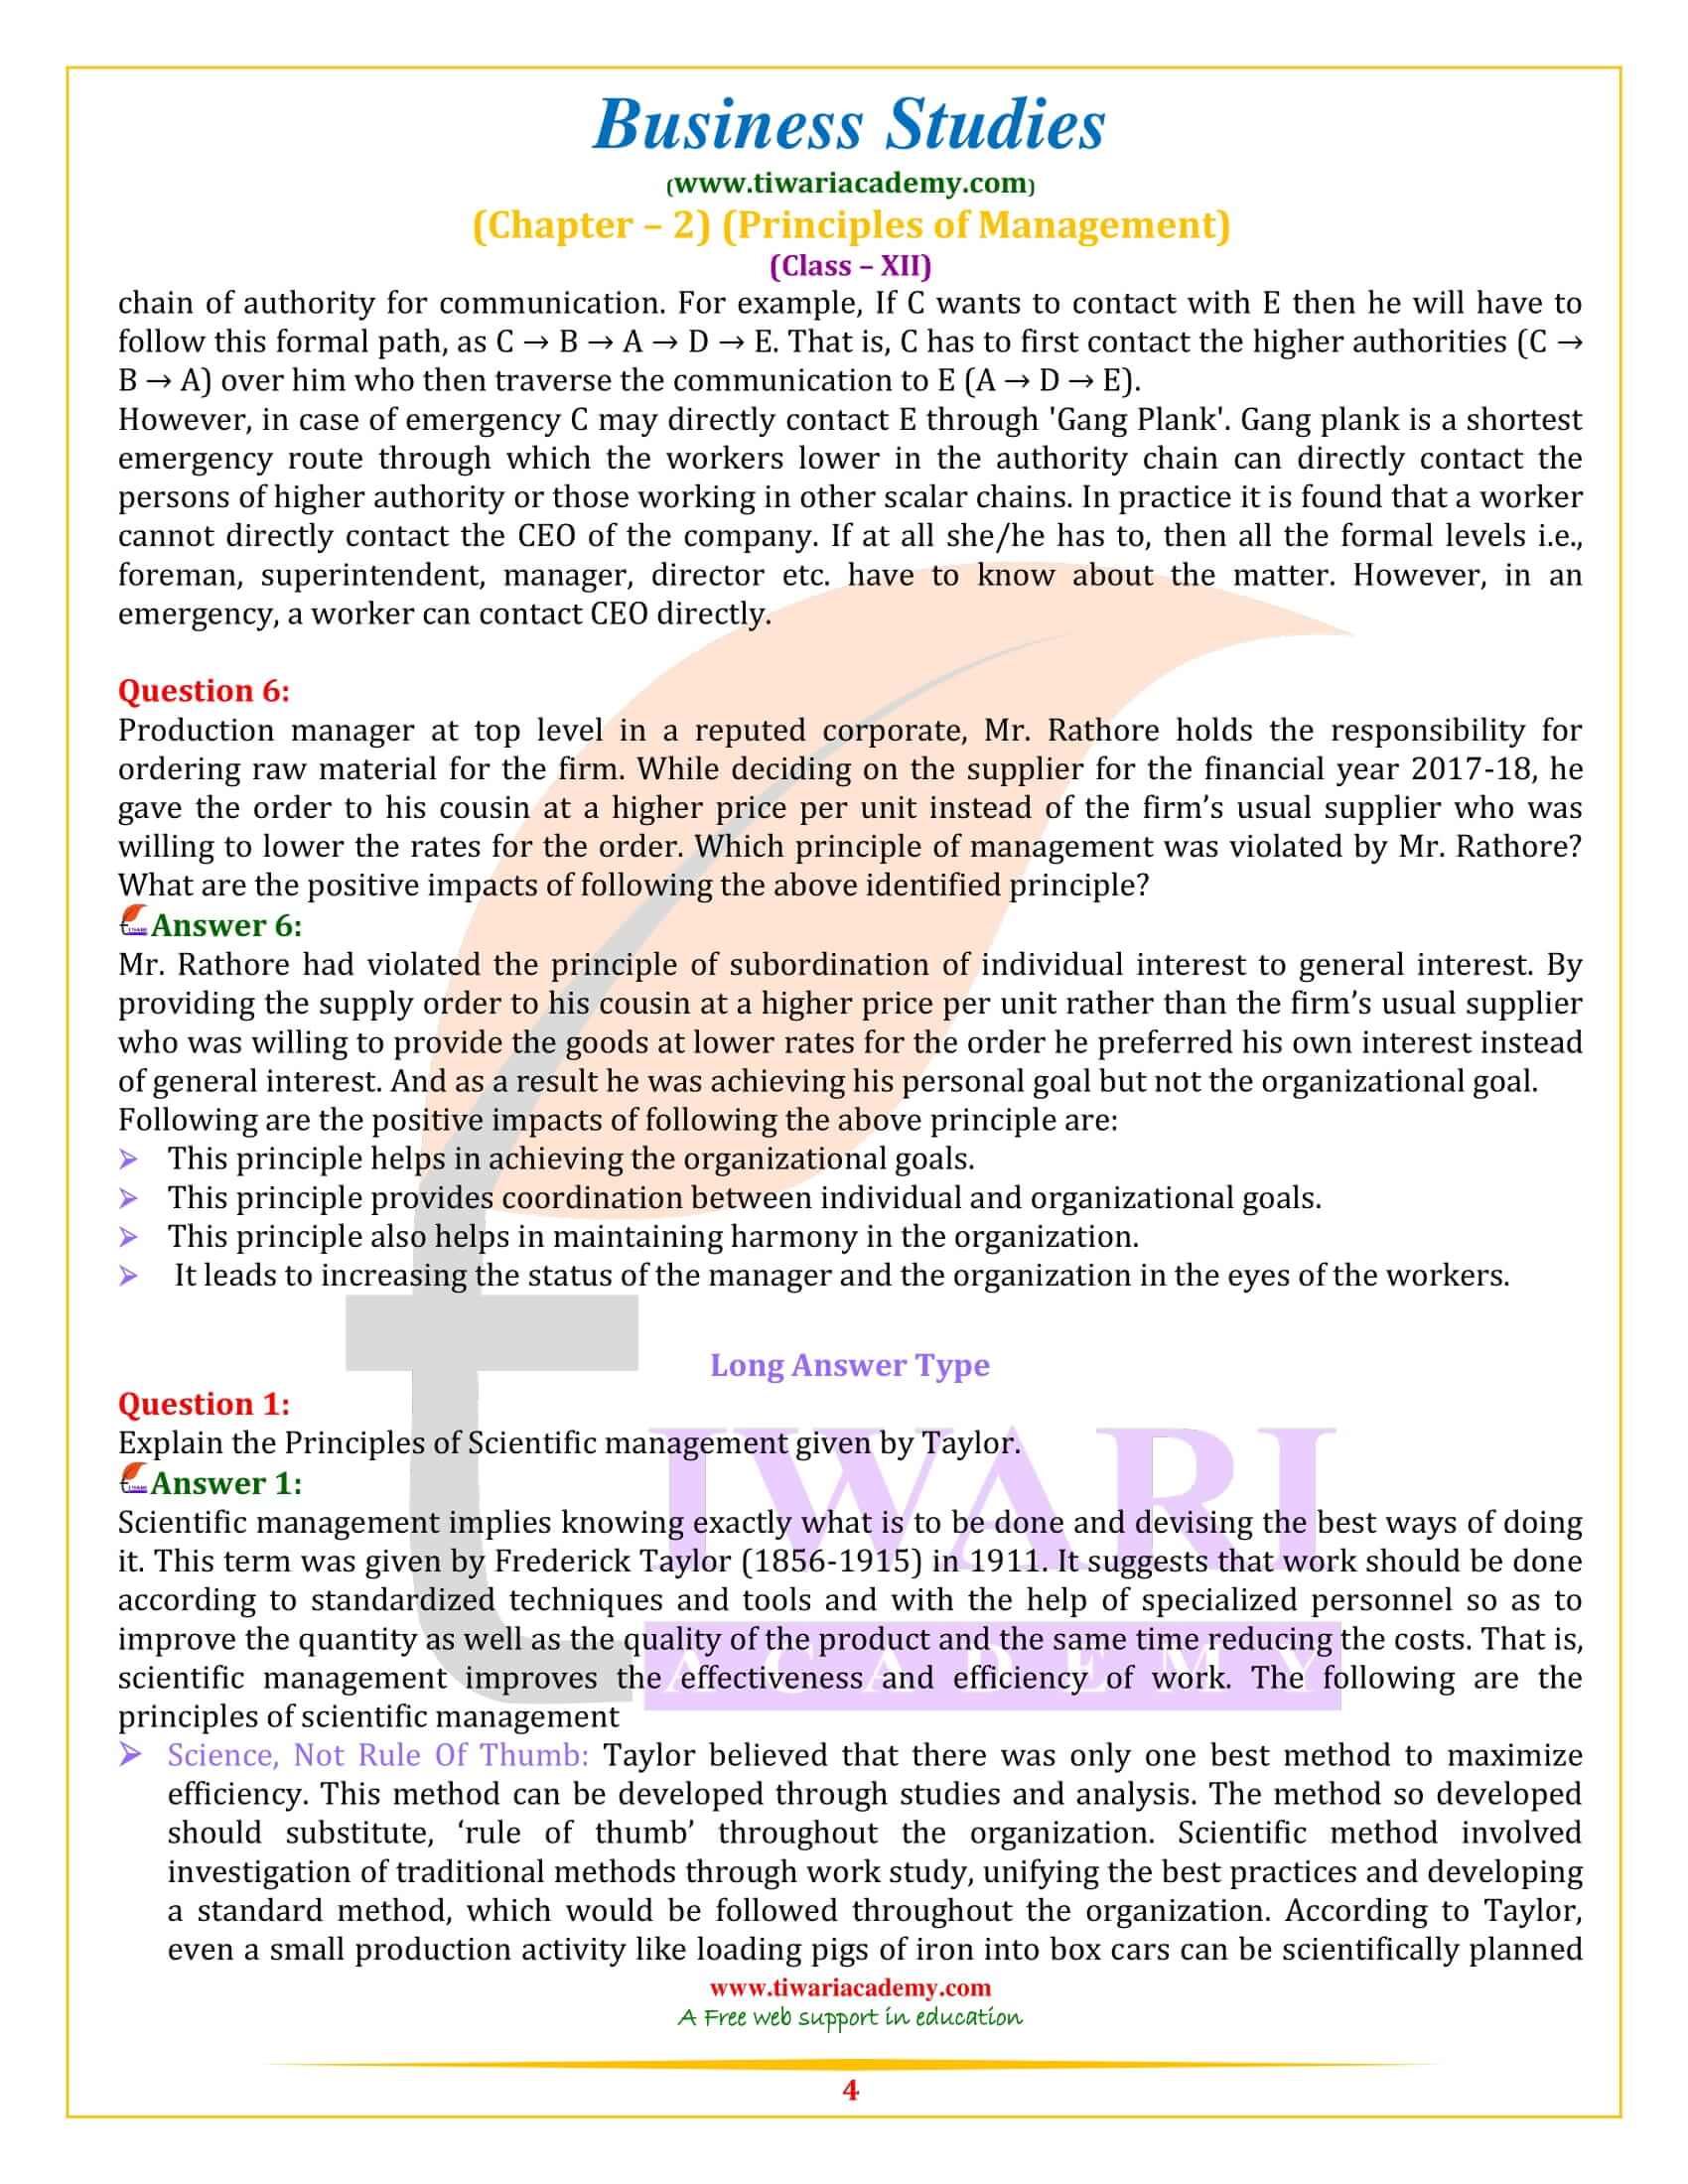 NCERT Solutions for Class 12 Business Studies Chapter 2 in PDF